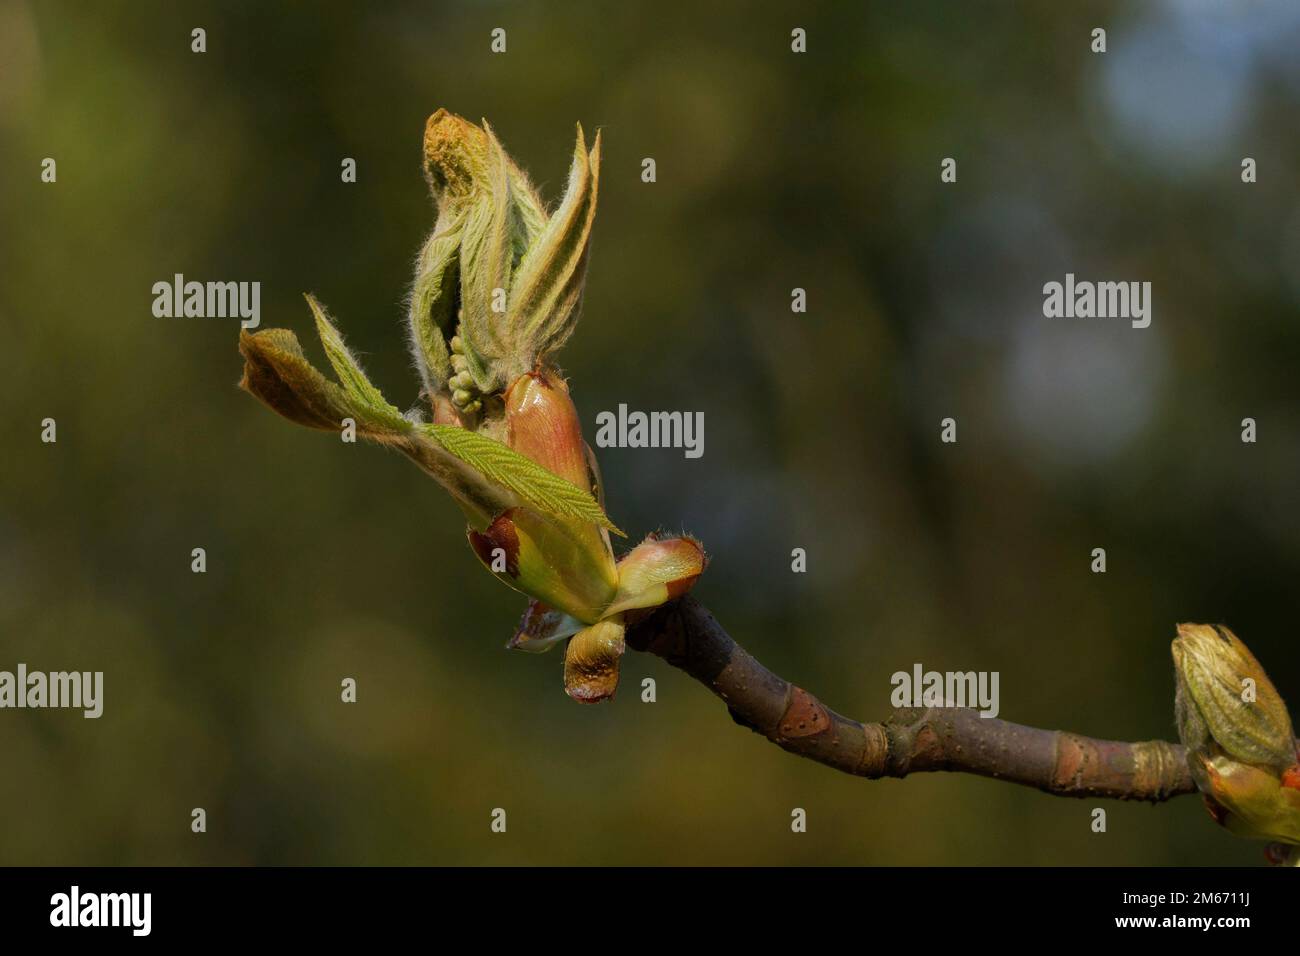 the bud of a horse chestnut tree unfolds in springtime Stock Photo